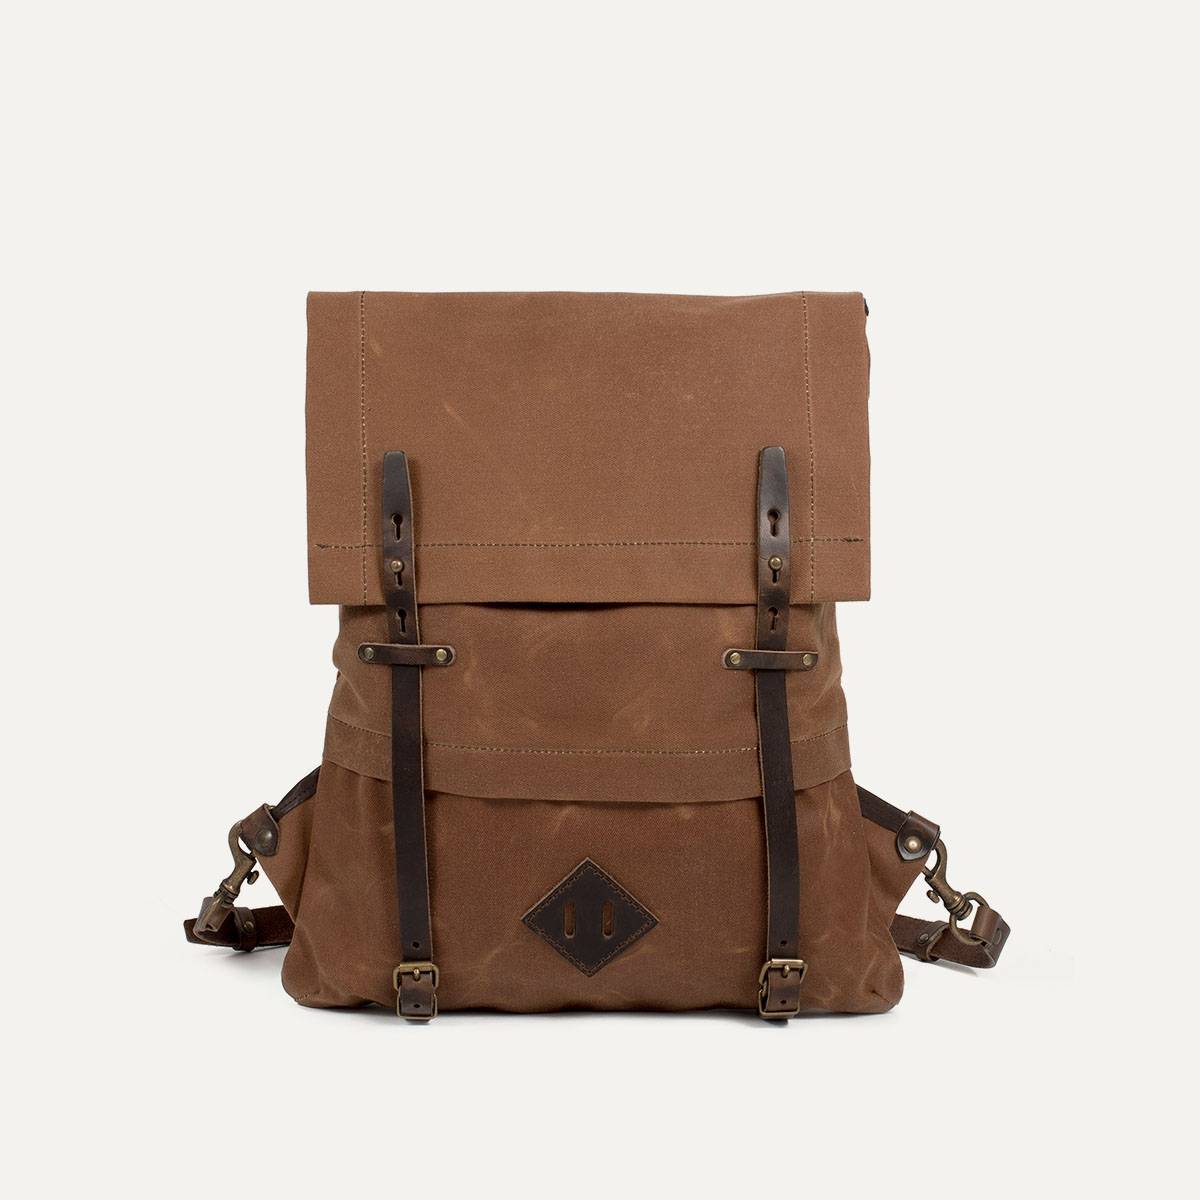 Sac Coursier WAXY - Camel/Palissandre (image n°1)